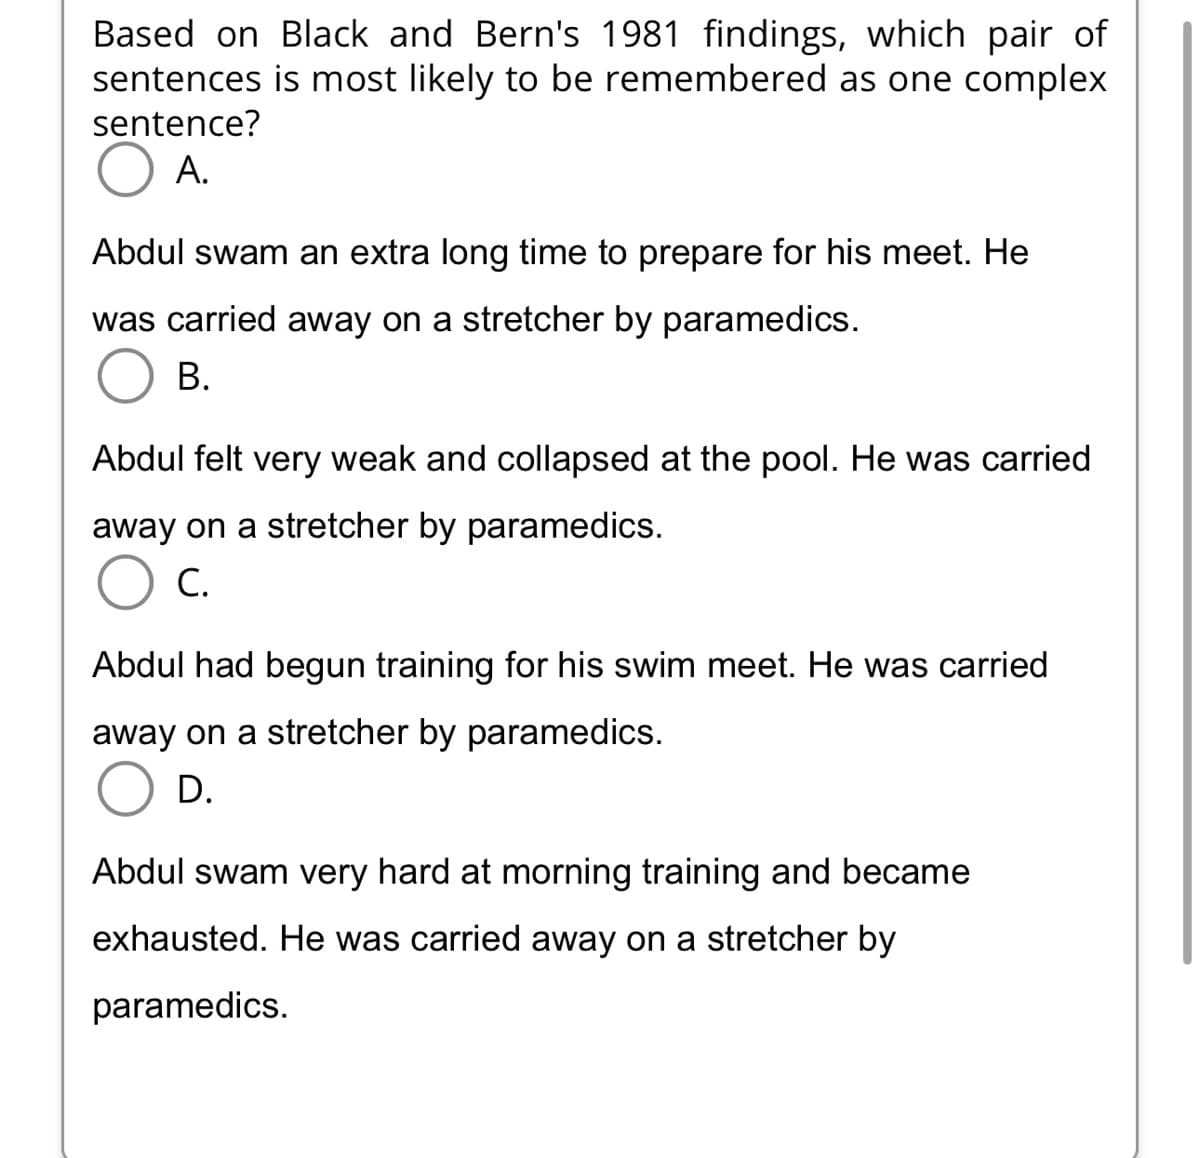 Based on Black and Bern's 1981 findings, which pair of
is most likely to be remembered as one complex
sentences
sentence?
A.
Abdul swam an extra long time to prepare for his meet. He
was carried away on a stretcher by paramedics.
B.
Abdul felt very weak and collapsed at the pool. He was carried
away on a stretcher by paramedics.
C.
Abdul had begun training for his swim meet. He was carried
away on a stretcher by paramedics.
D.
Abdul swam very hard at morning training and became
exhausted. He was carried away on a stretcher by
paramedics.